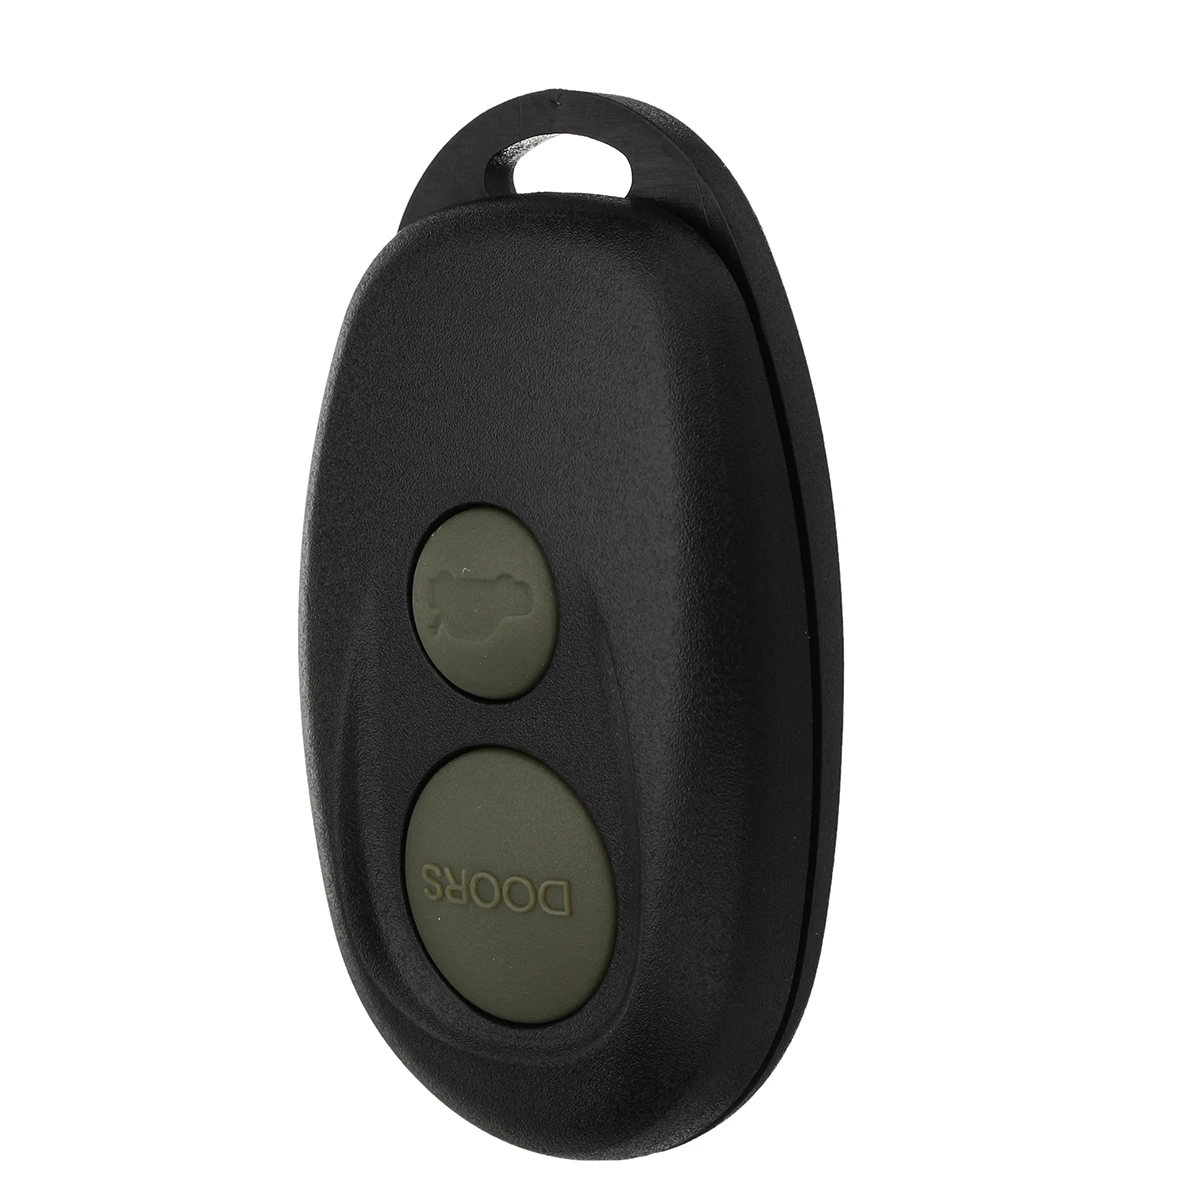 2 Replacement For 02 2003 2004 2005 2006 Toyota Camry Key Fob Remote Shell Case 